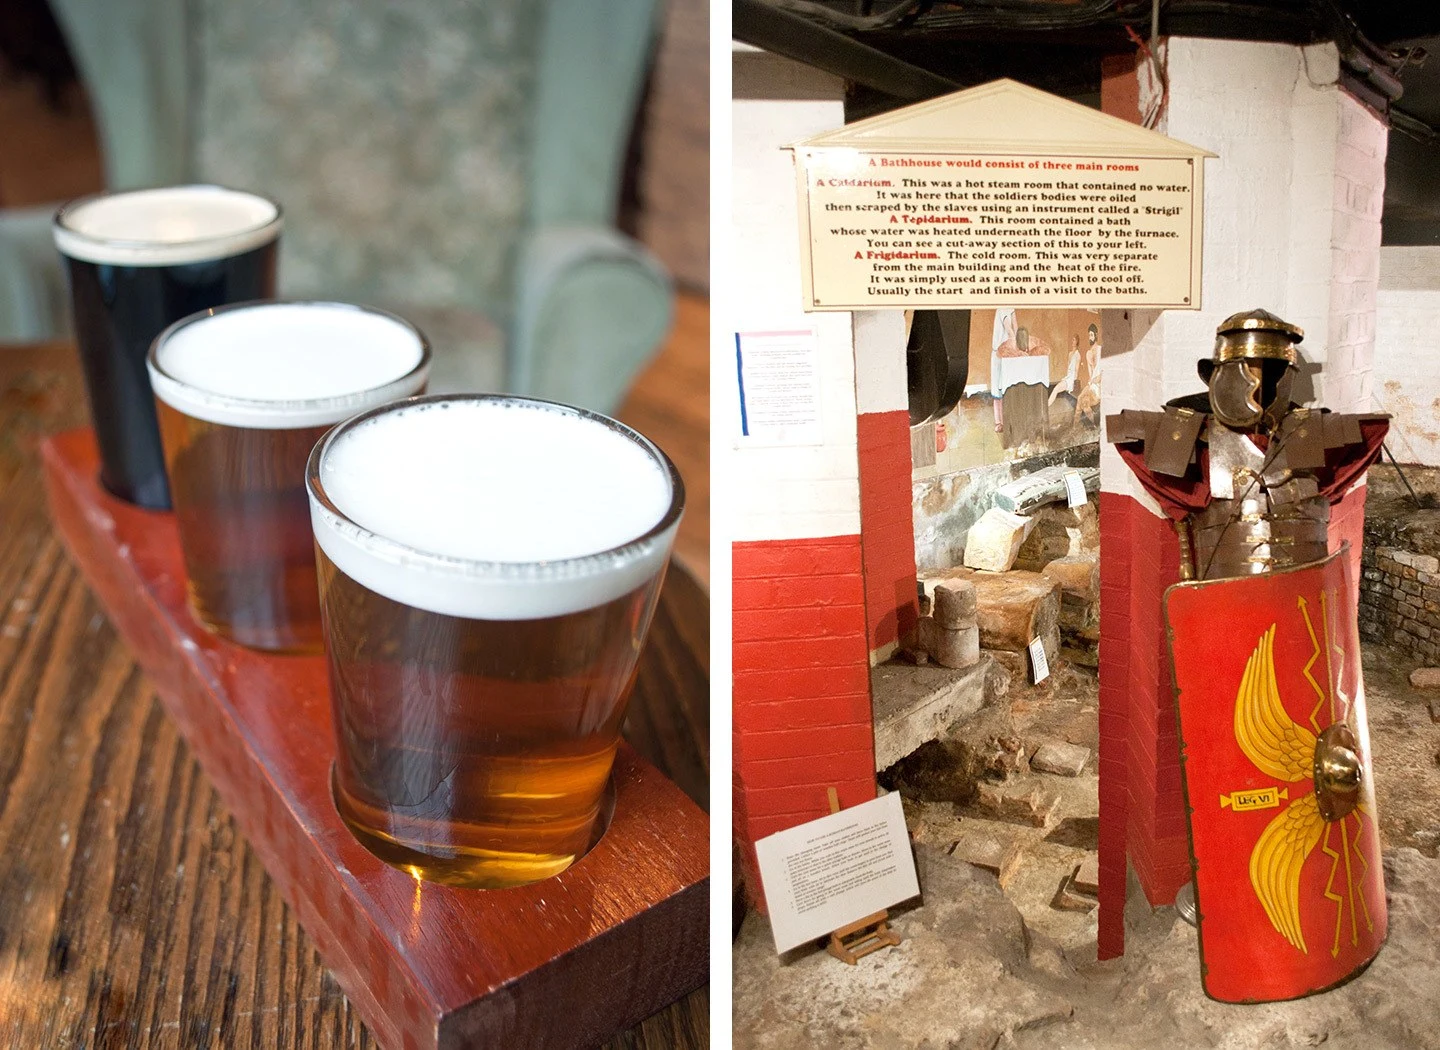 York Brewery beer tasting and the Roman baths in a pub basement